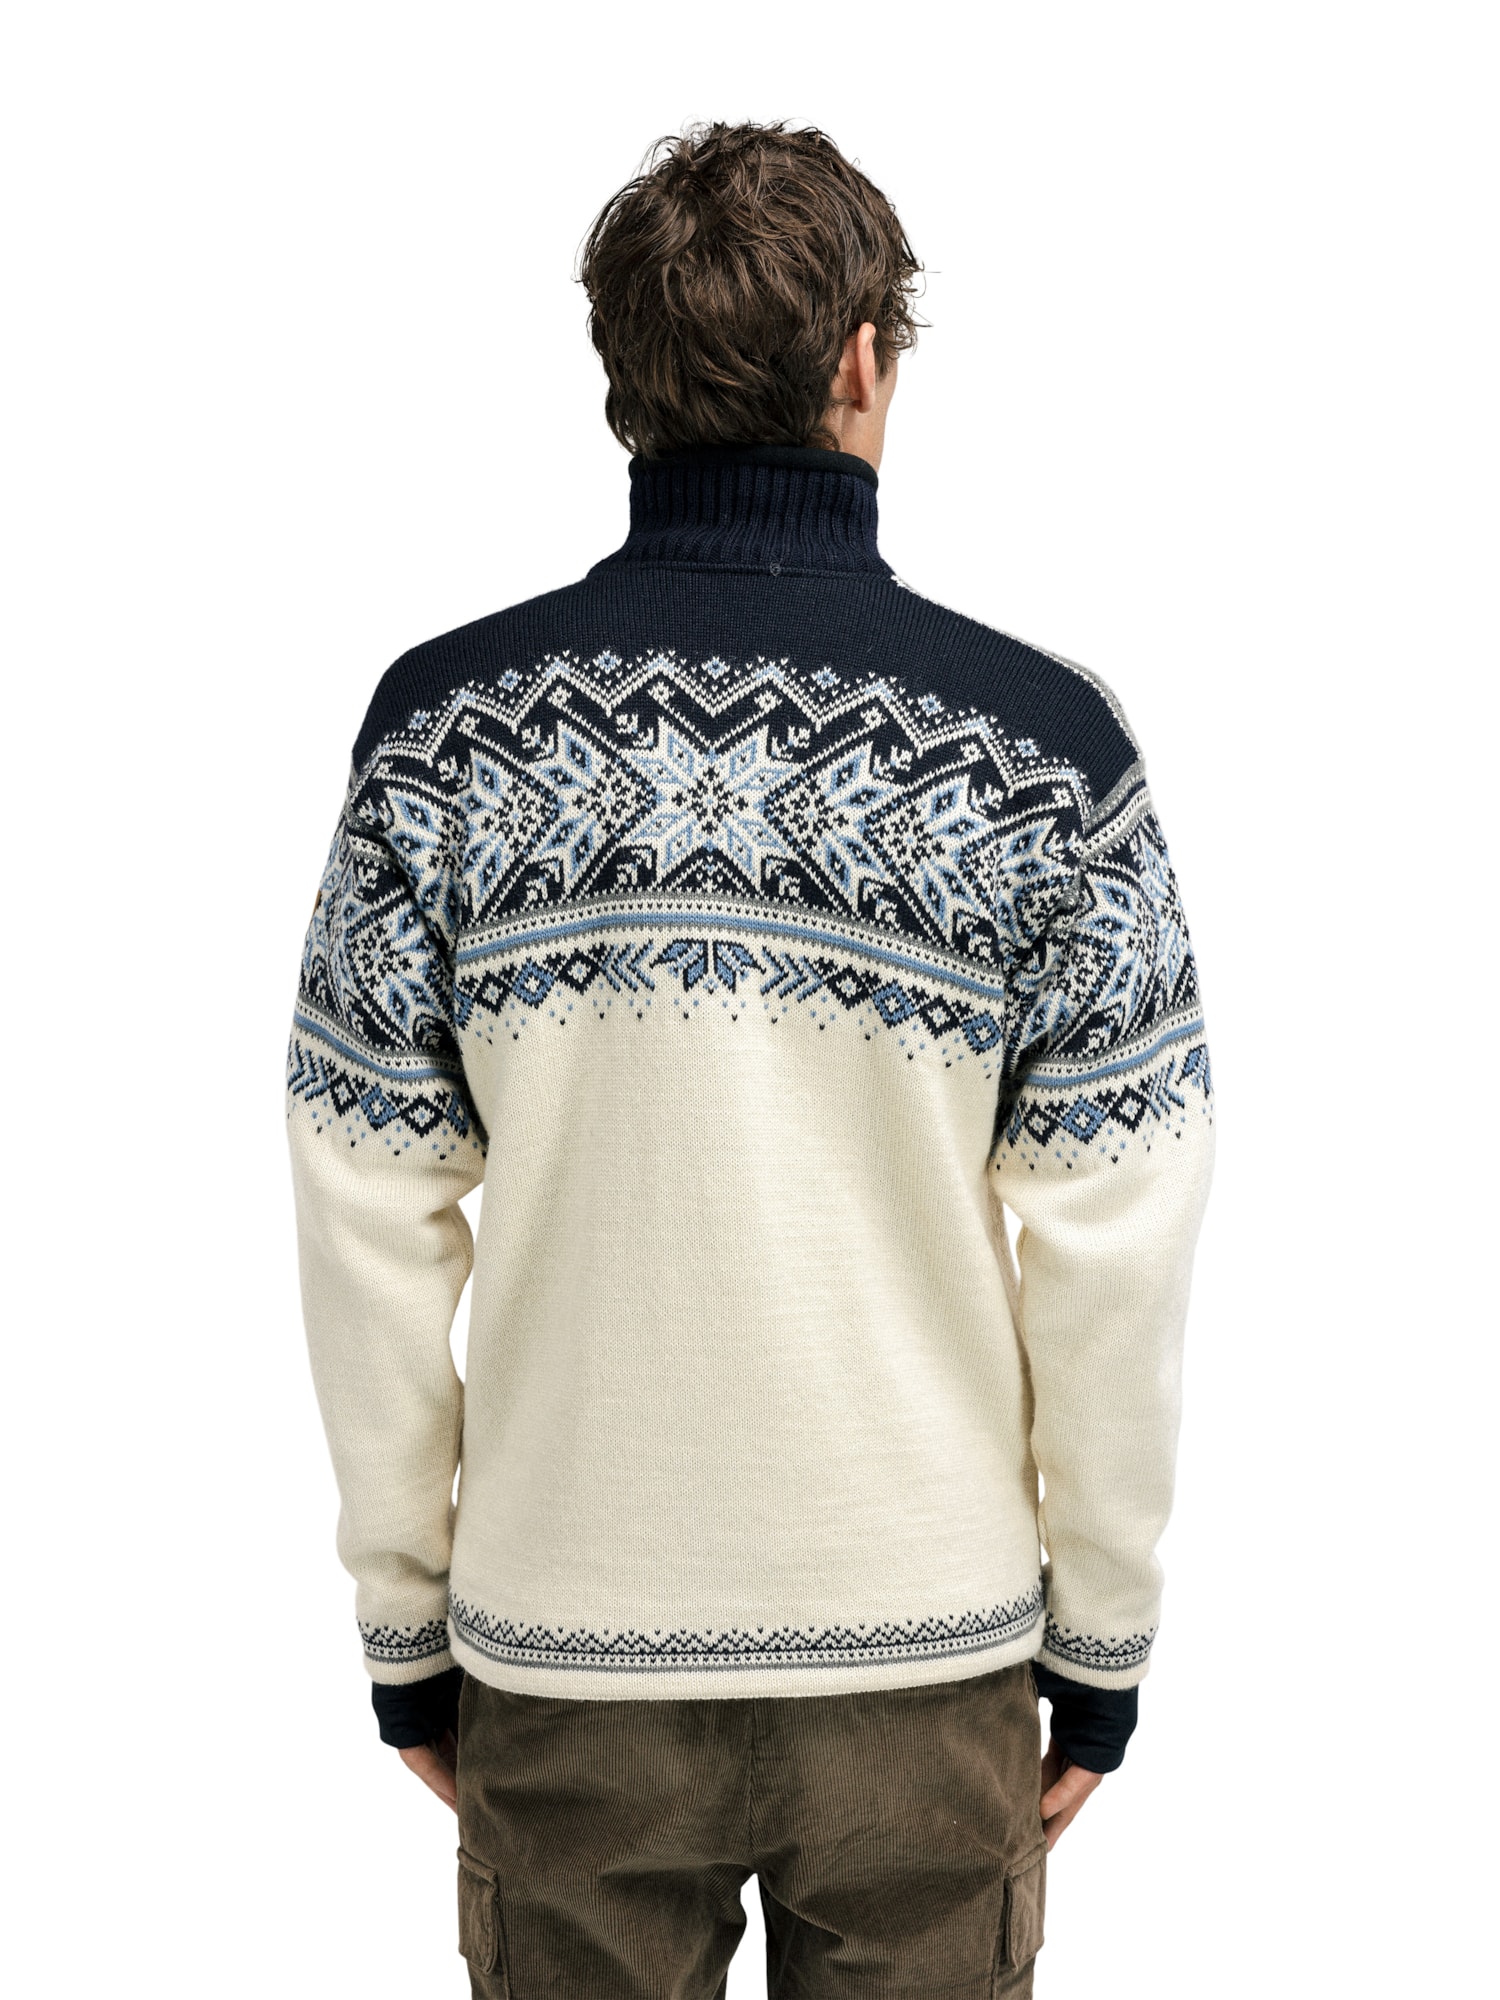 Vail Weatherproof Sweater - Men - Offwhite - Dale of Norway - Dale of Norway